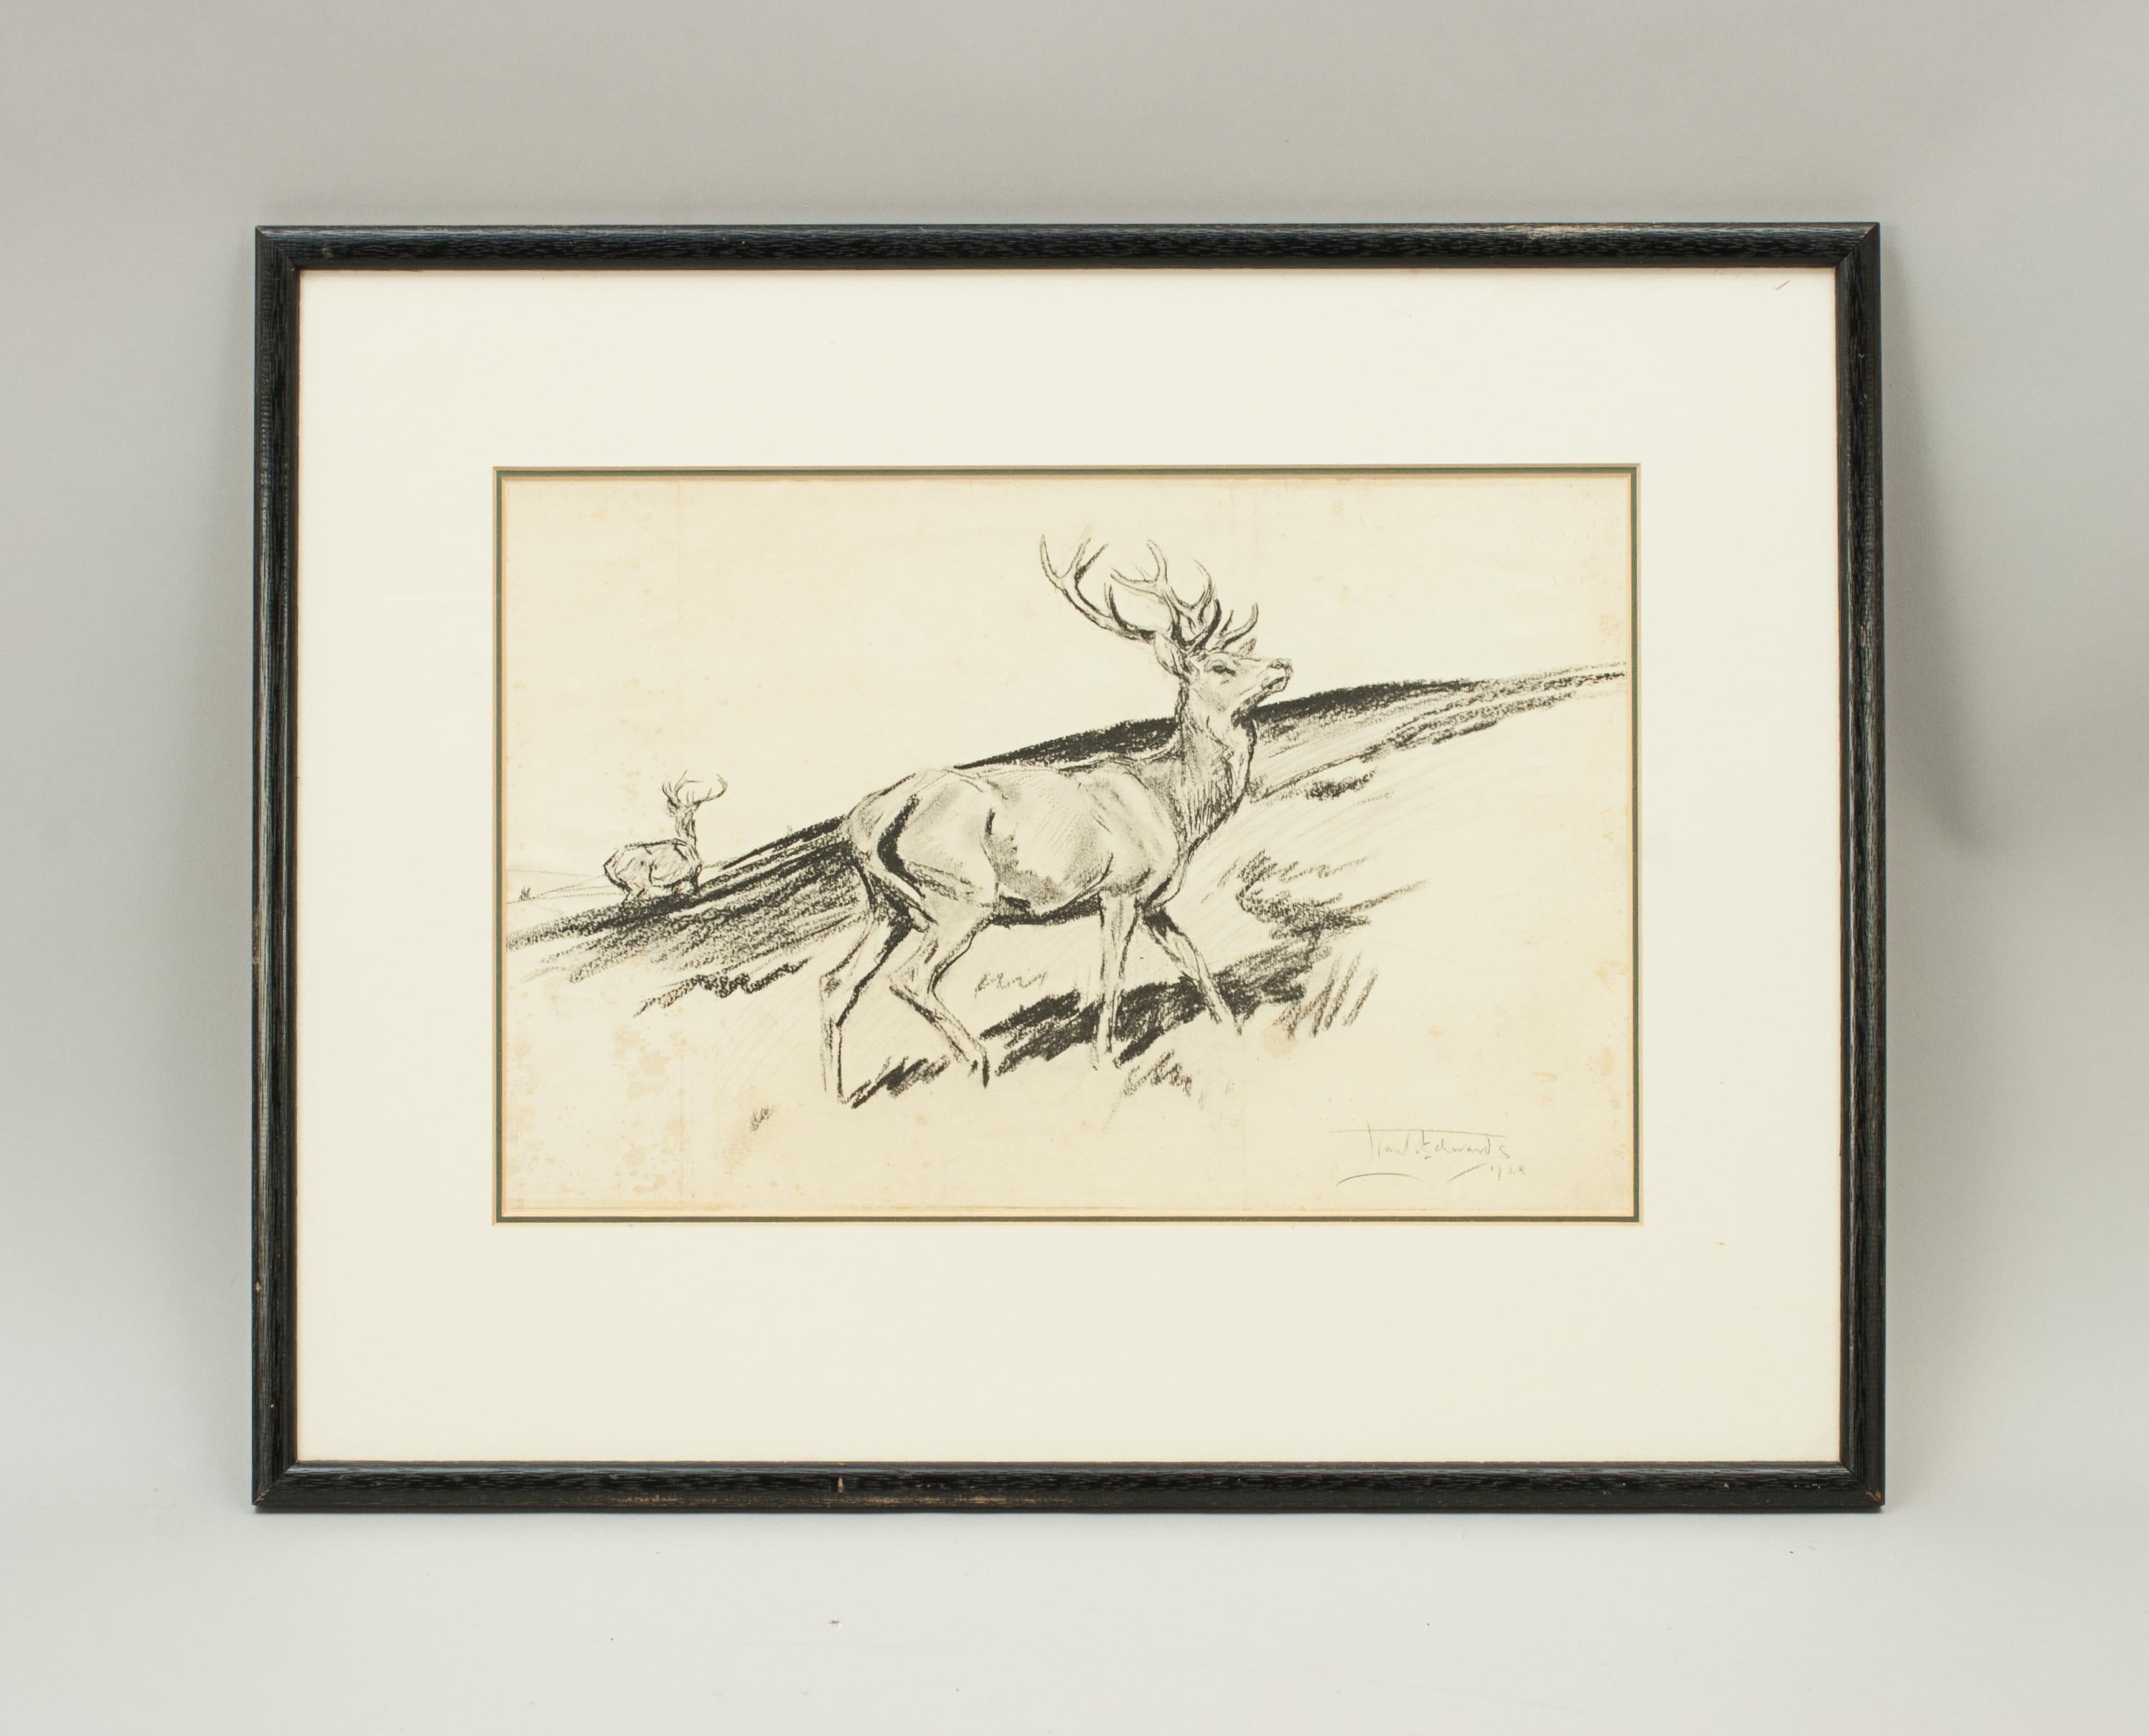 Paper Original Lionel Edwards Pencil Drawing of a Stag on the Hill, Signed and Dated